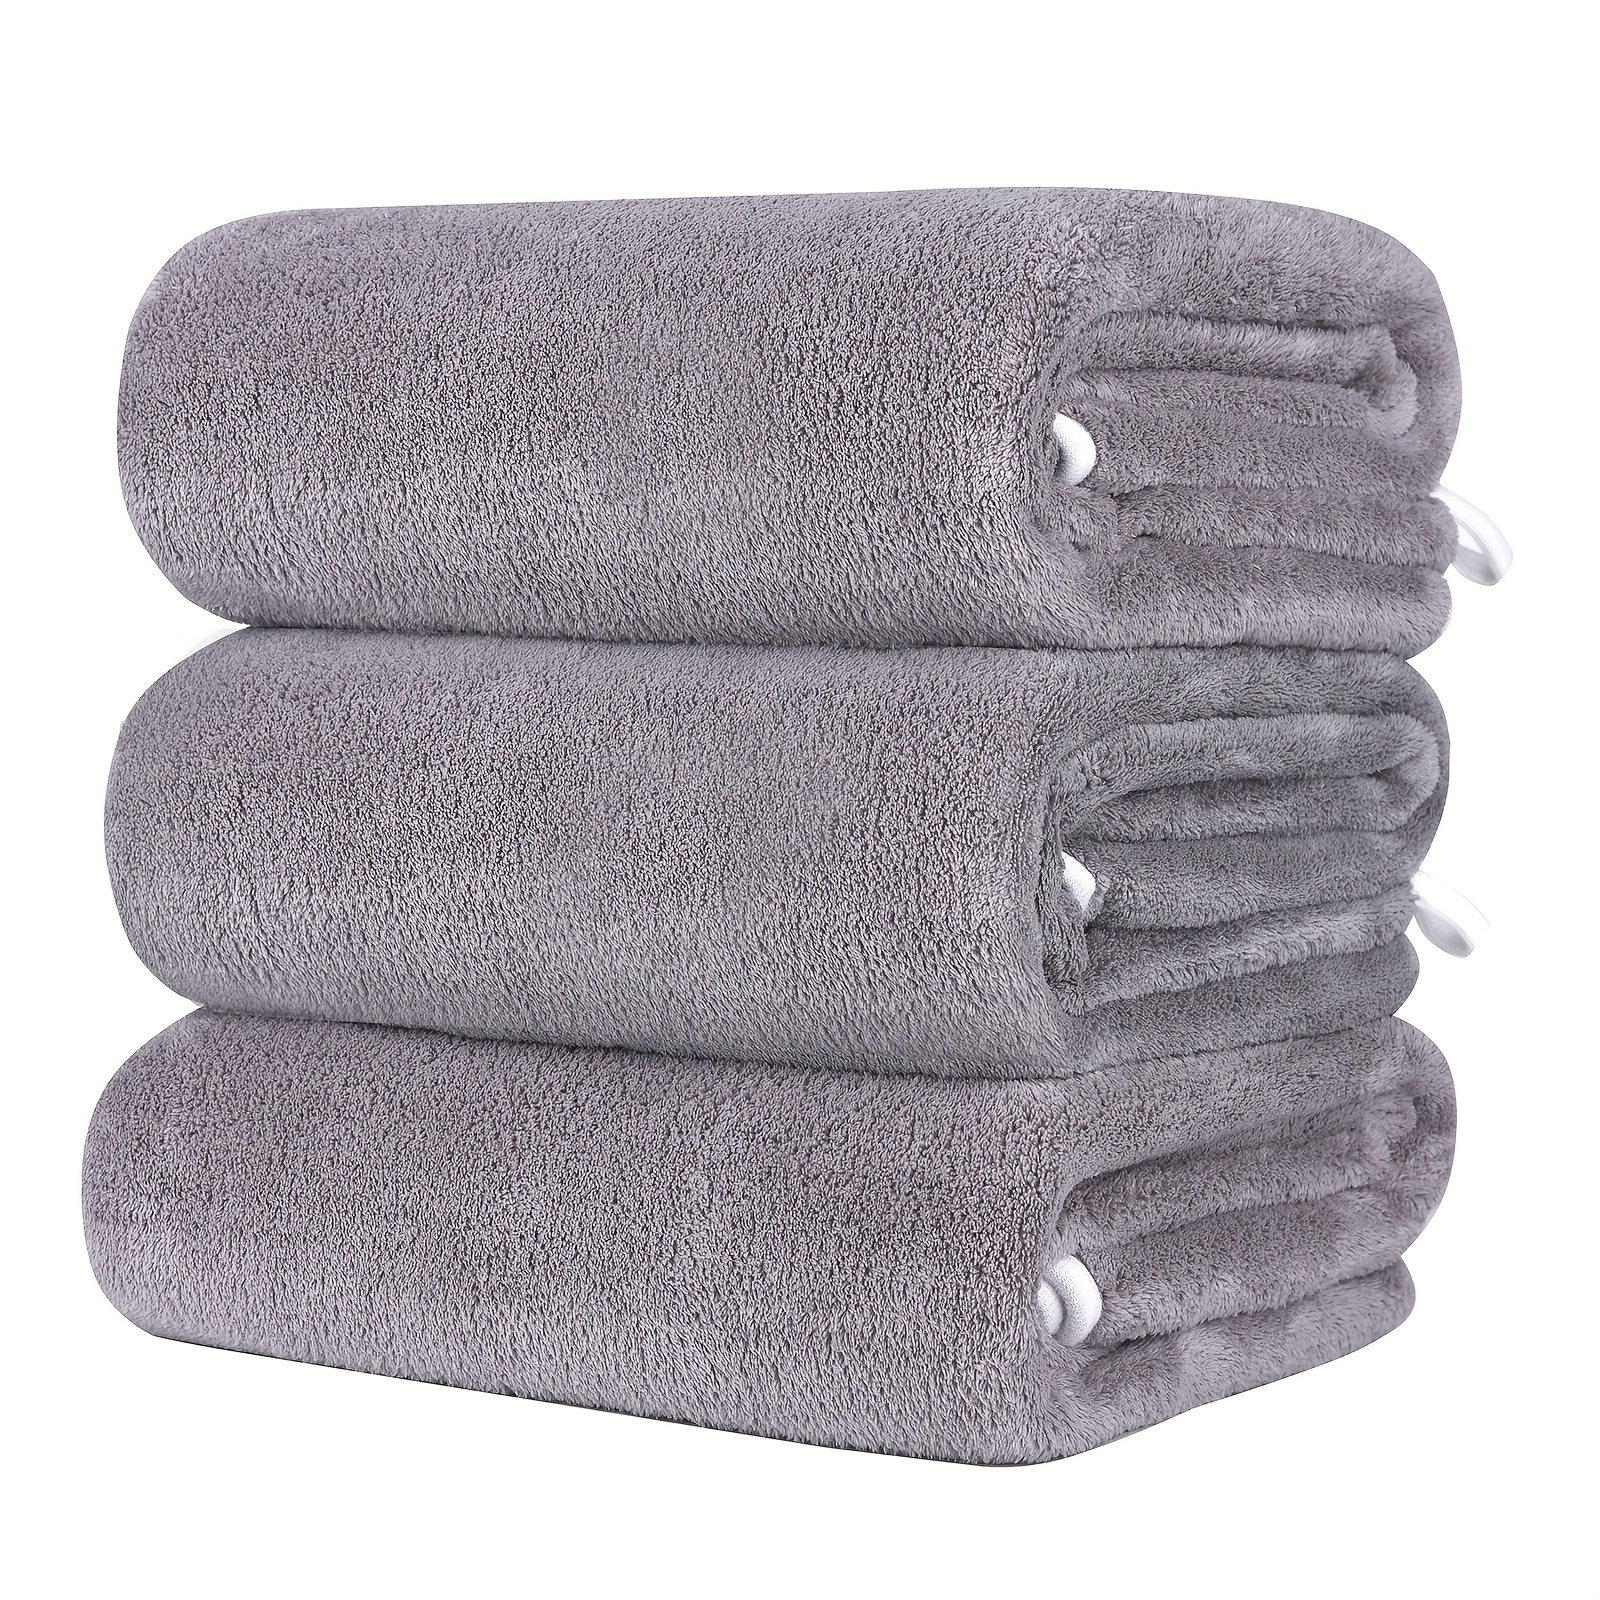 Gwong 4Pcs Cleaning Towels Super Absorbent Fade-Resistant Cotton